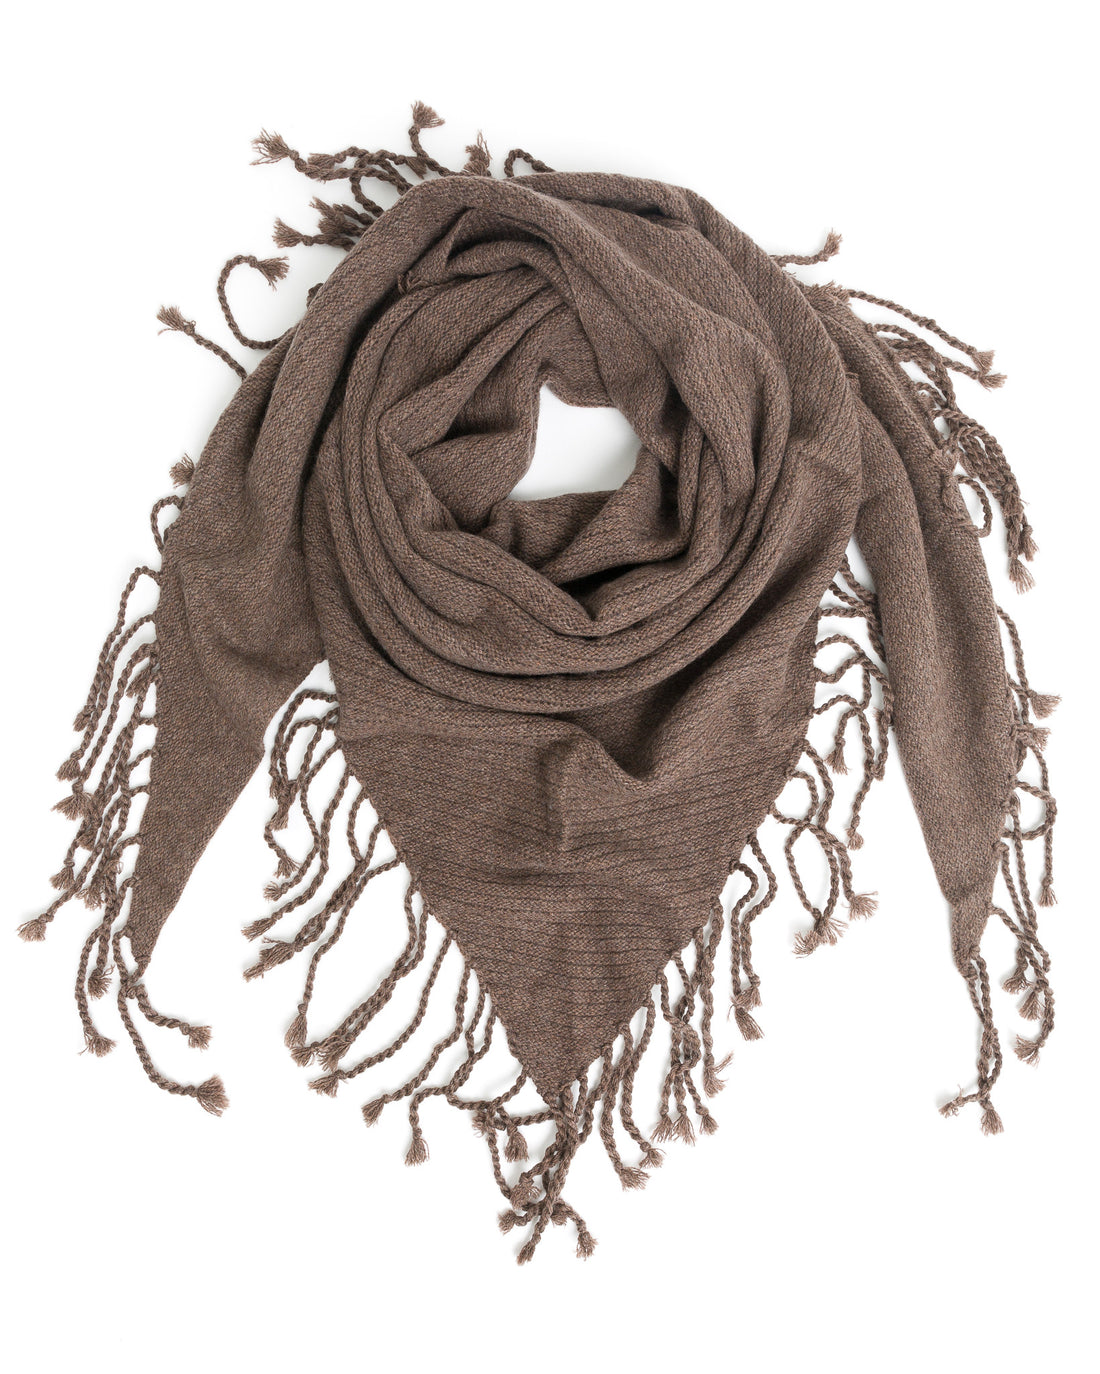 ACCESSORIES - On Dropped Needle Cashmere Shawl